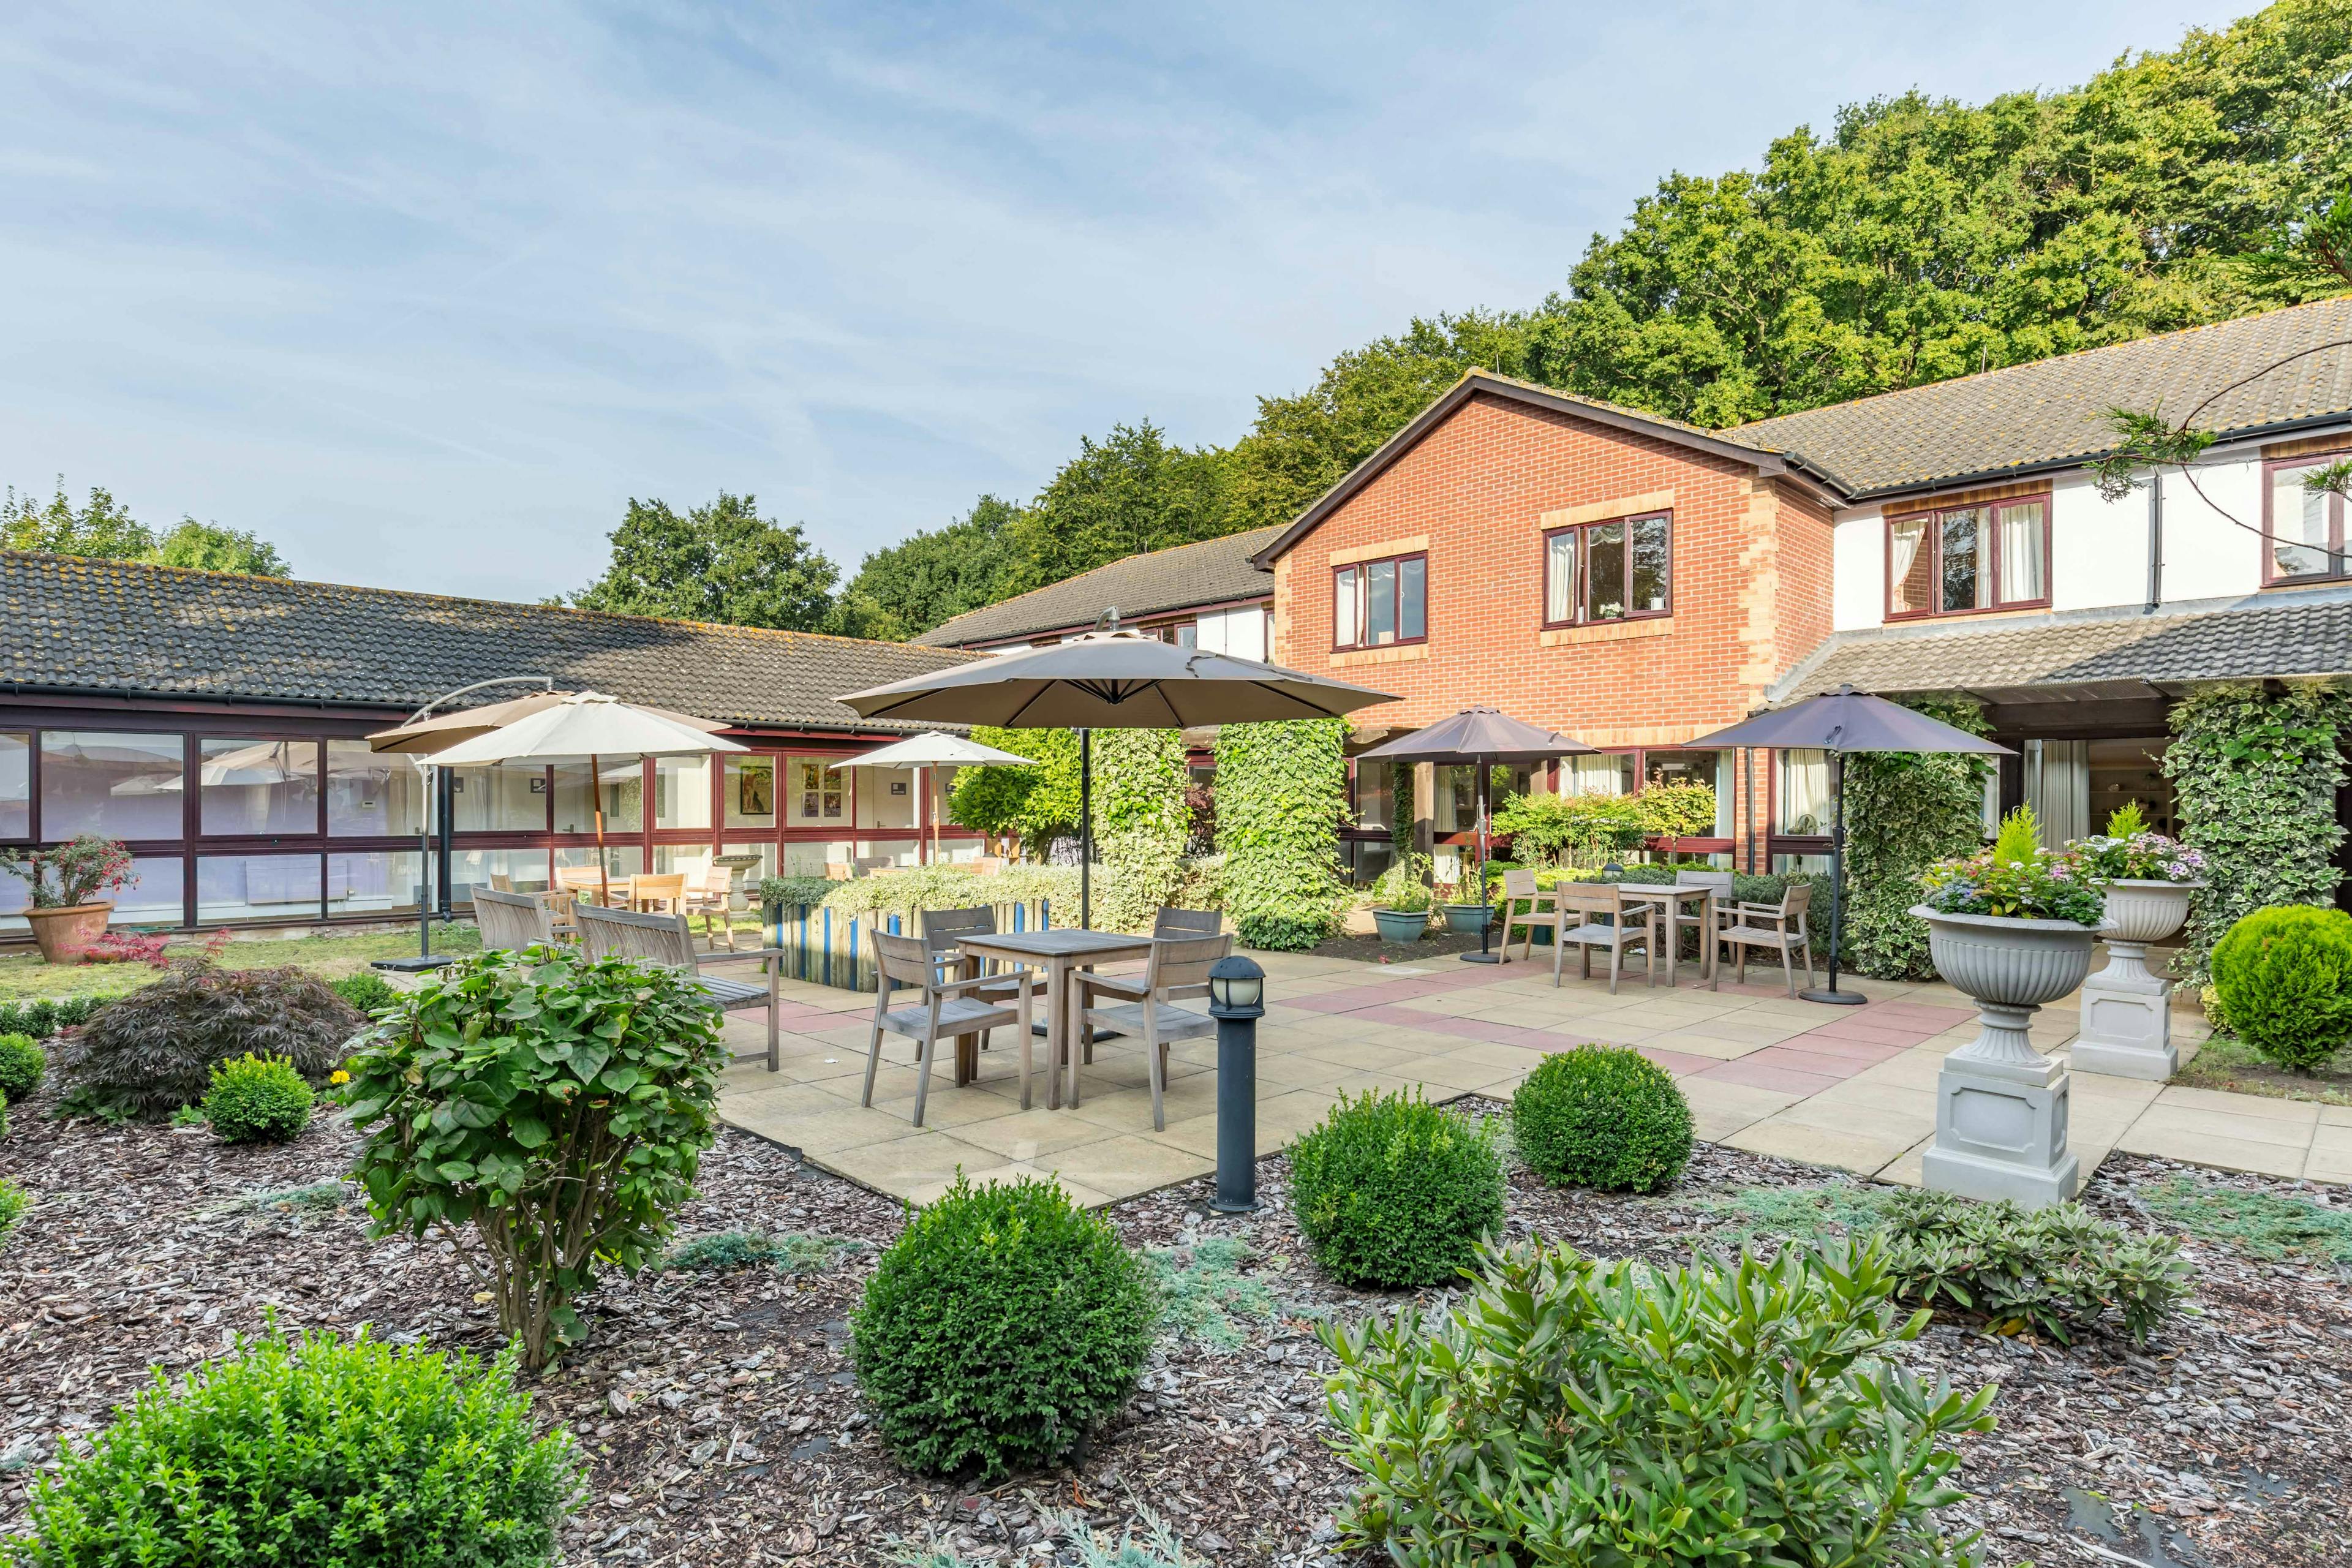 Garden at Leonard Lodge Care Home in Brentwood, Essex